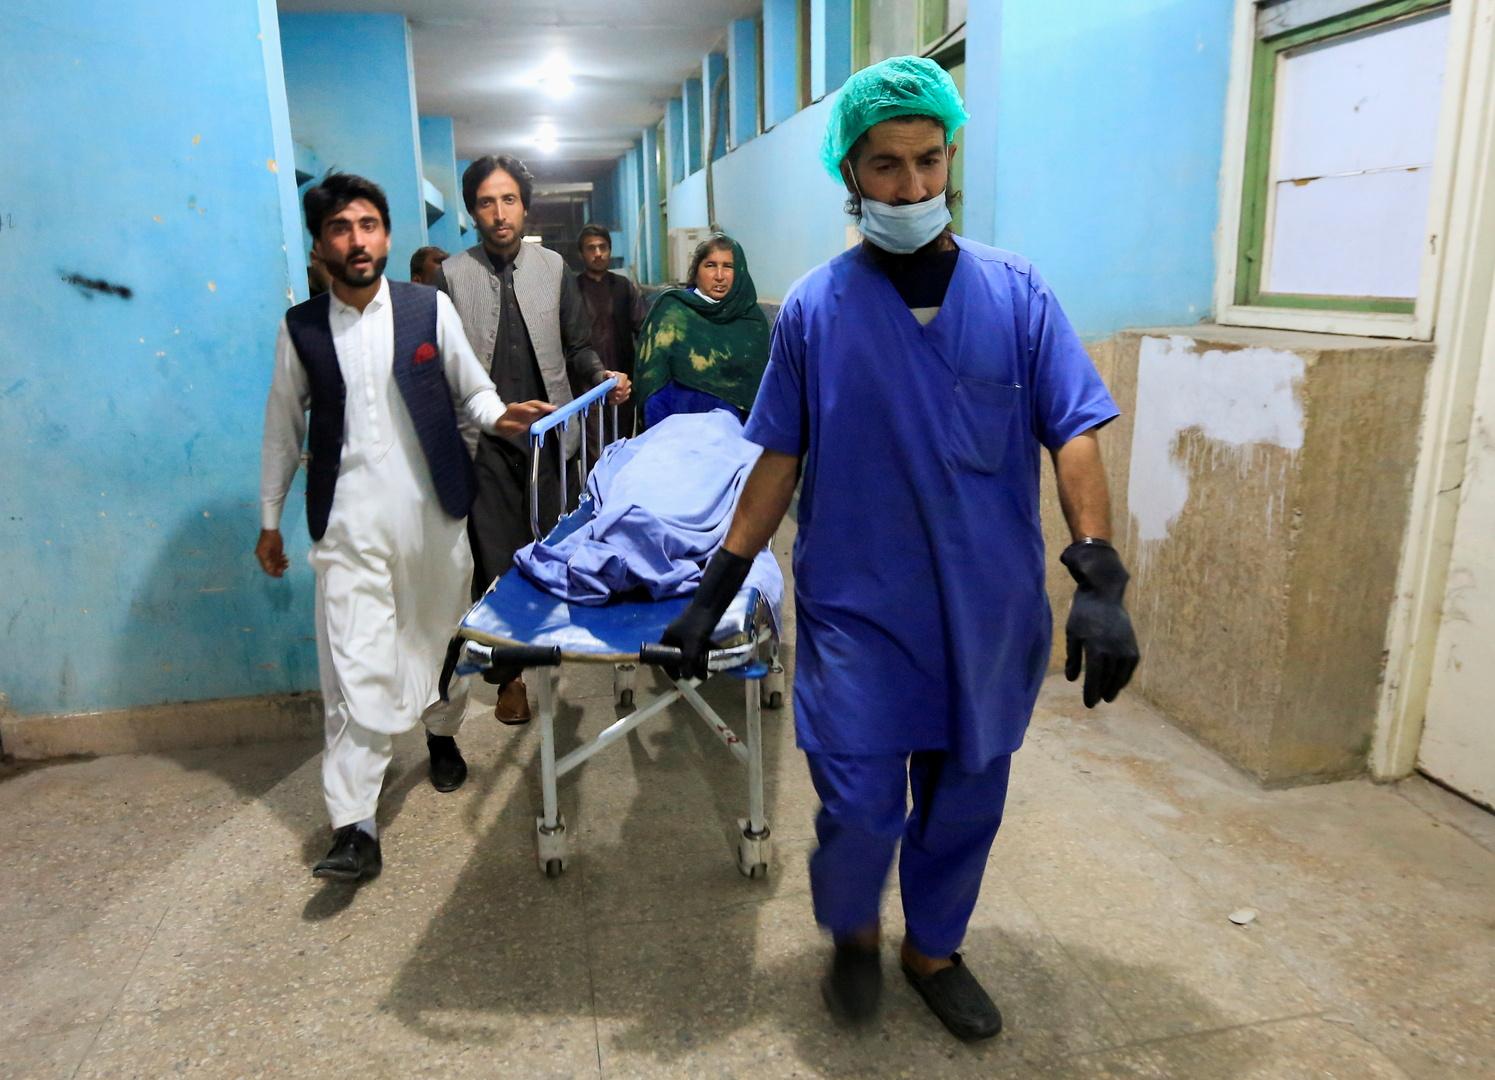 The attack comes two days after three female media workers were gunned down in Jalalabad in separate attacks that were just minutes apart - Avaz